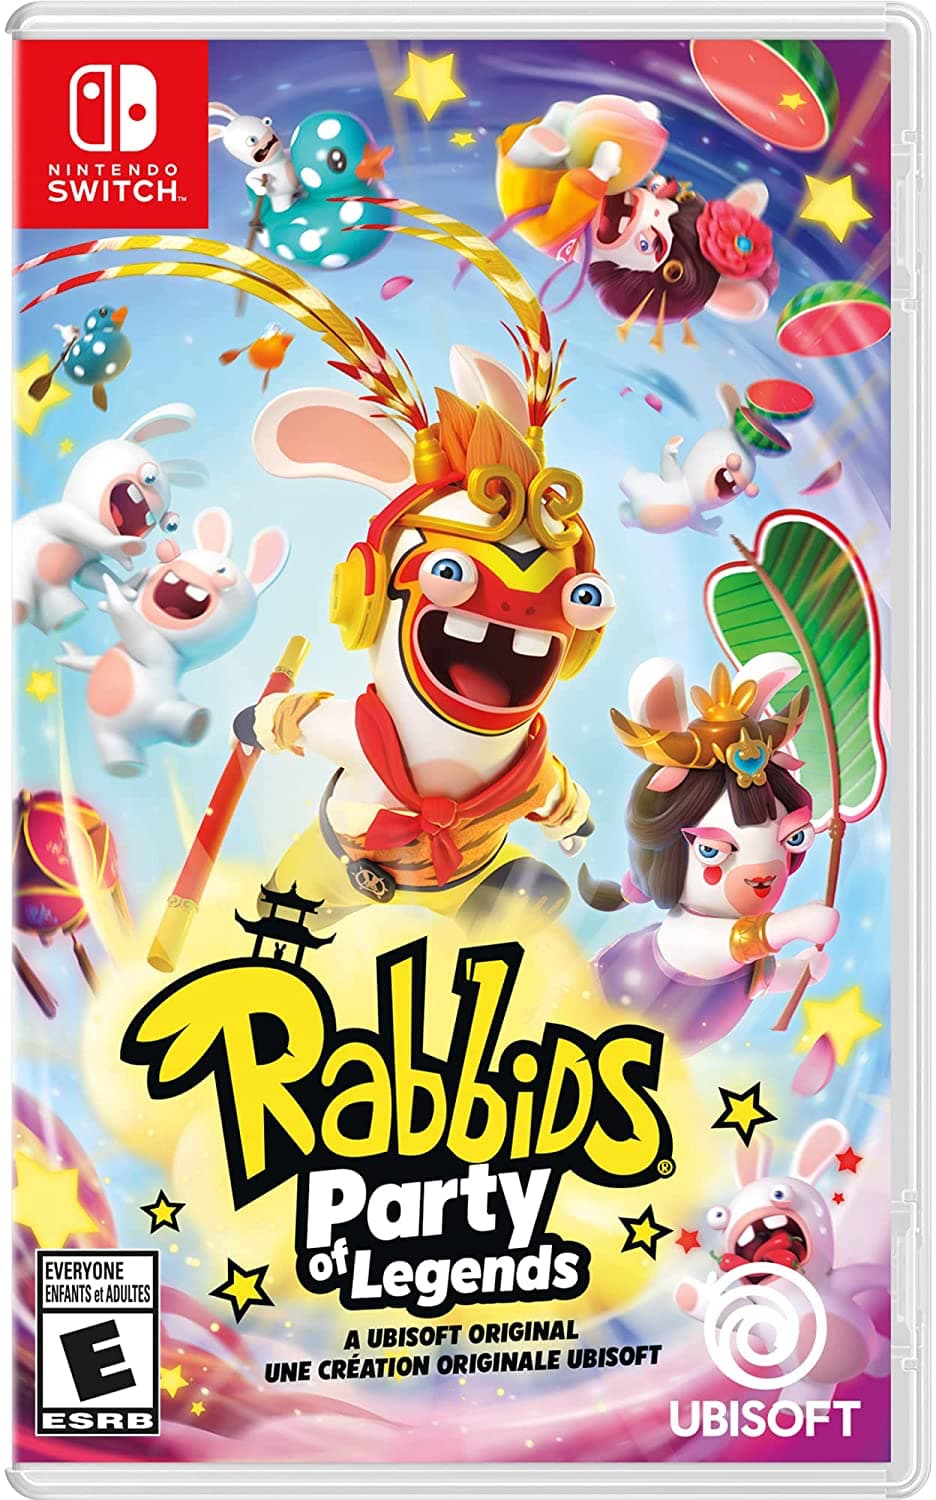 Rabbids Part of Legends for Nintendo Switch.